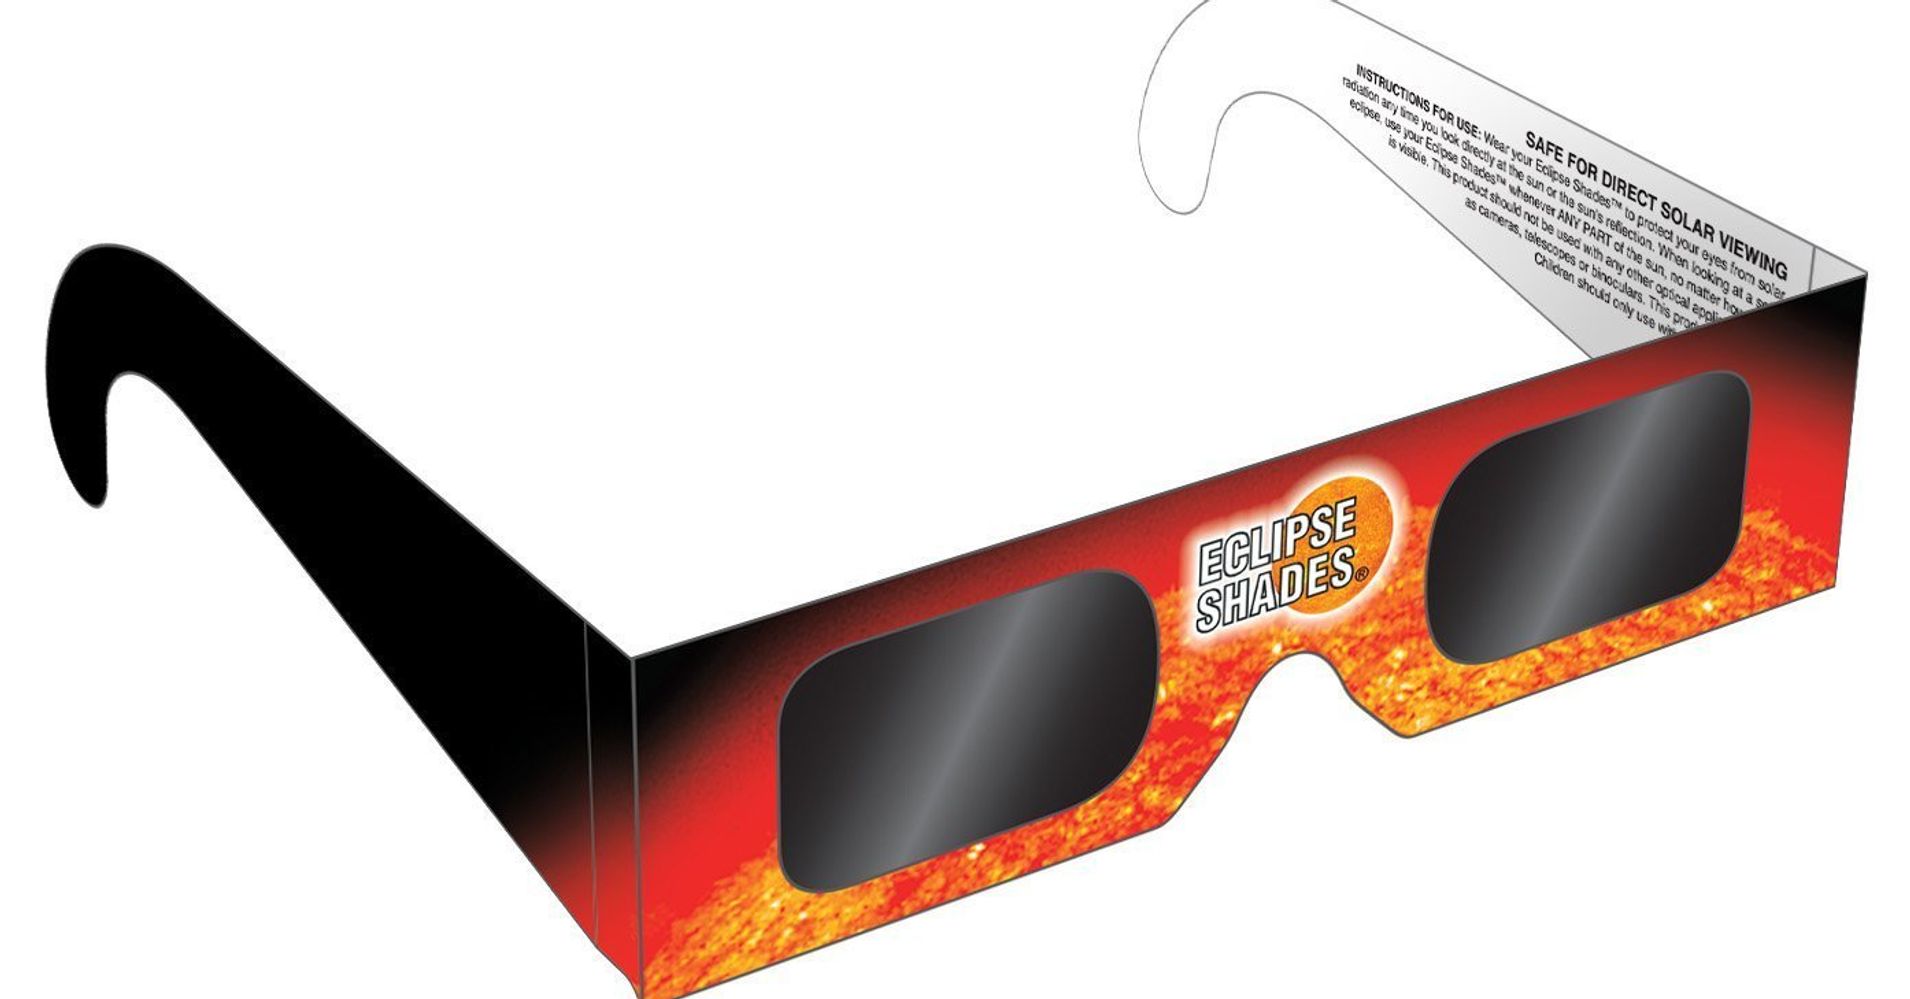 Here's How Much Those Eclipse Sunglasses Really Cost HuffPost